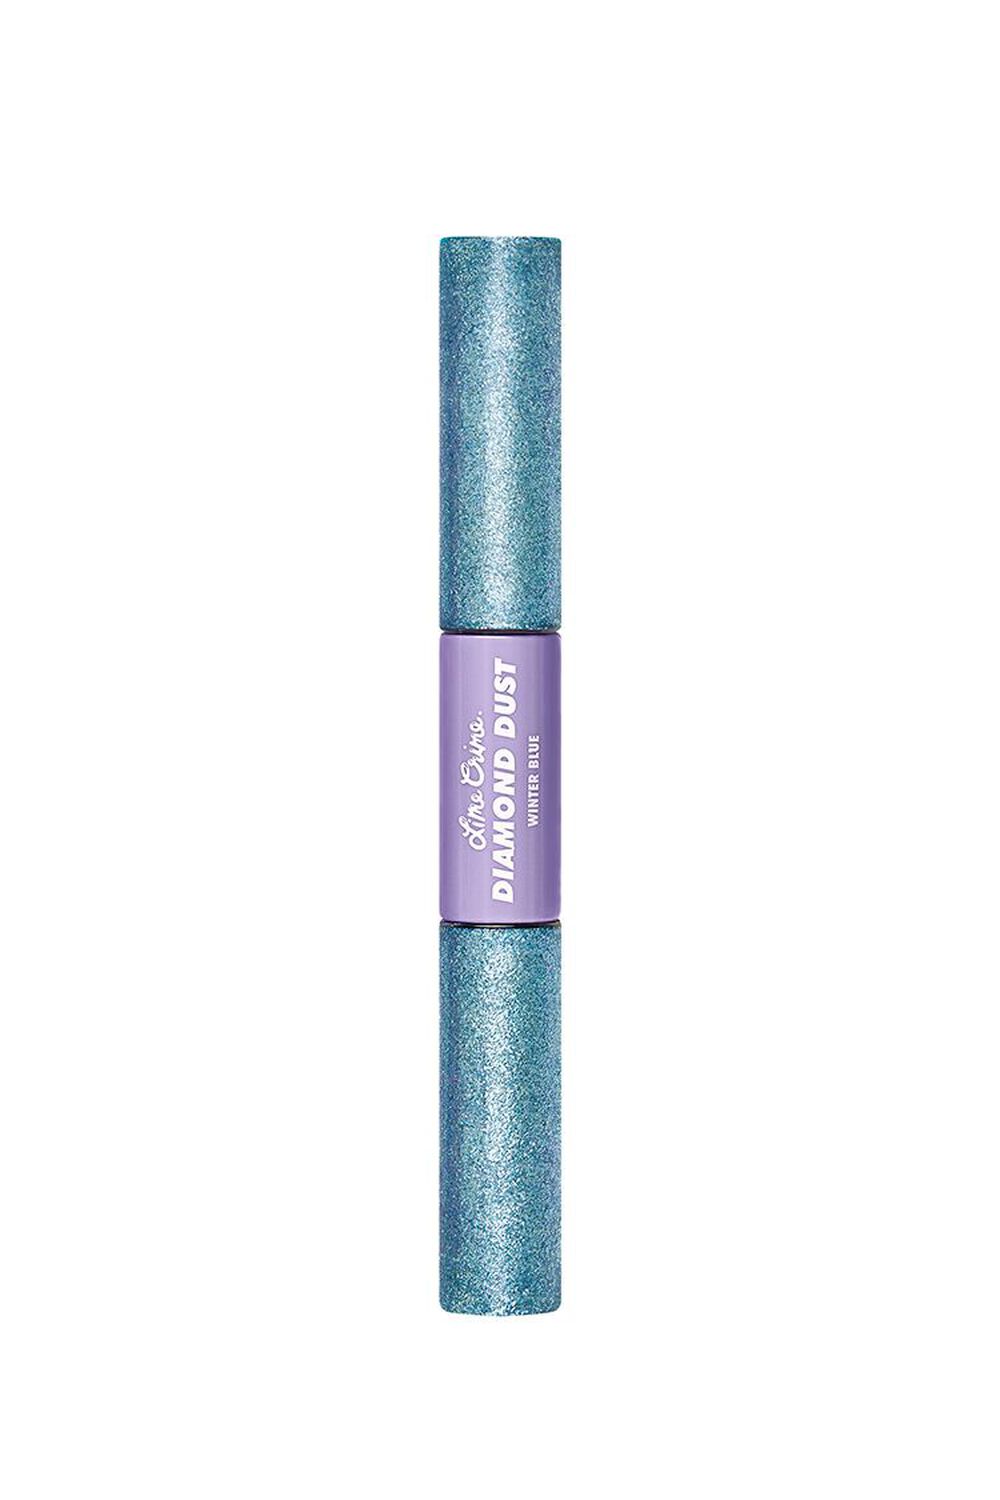 Lime Crime Diamond Dust Iridescent Eye and Brow Topper , image 2